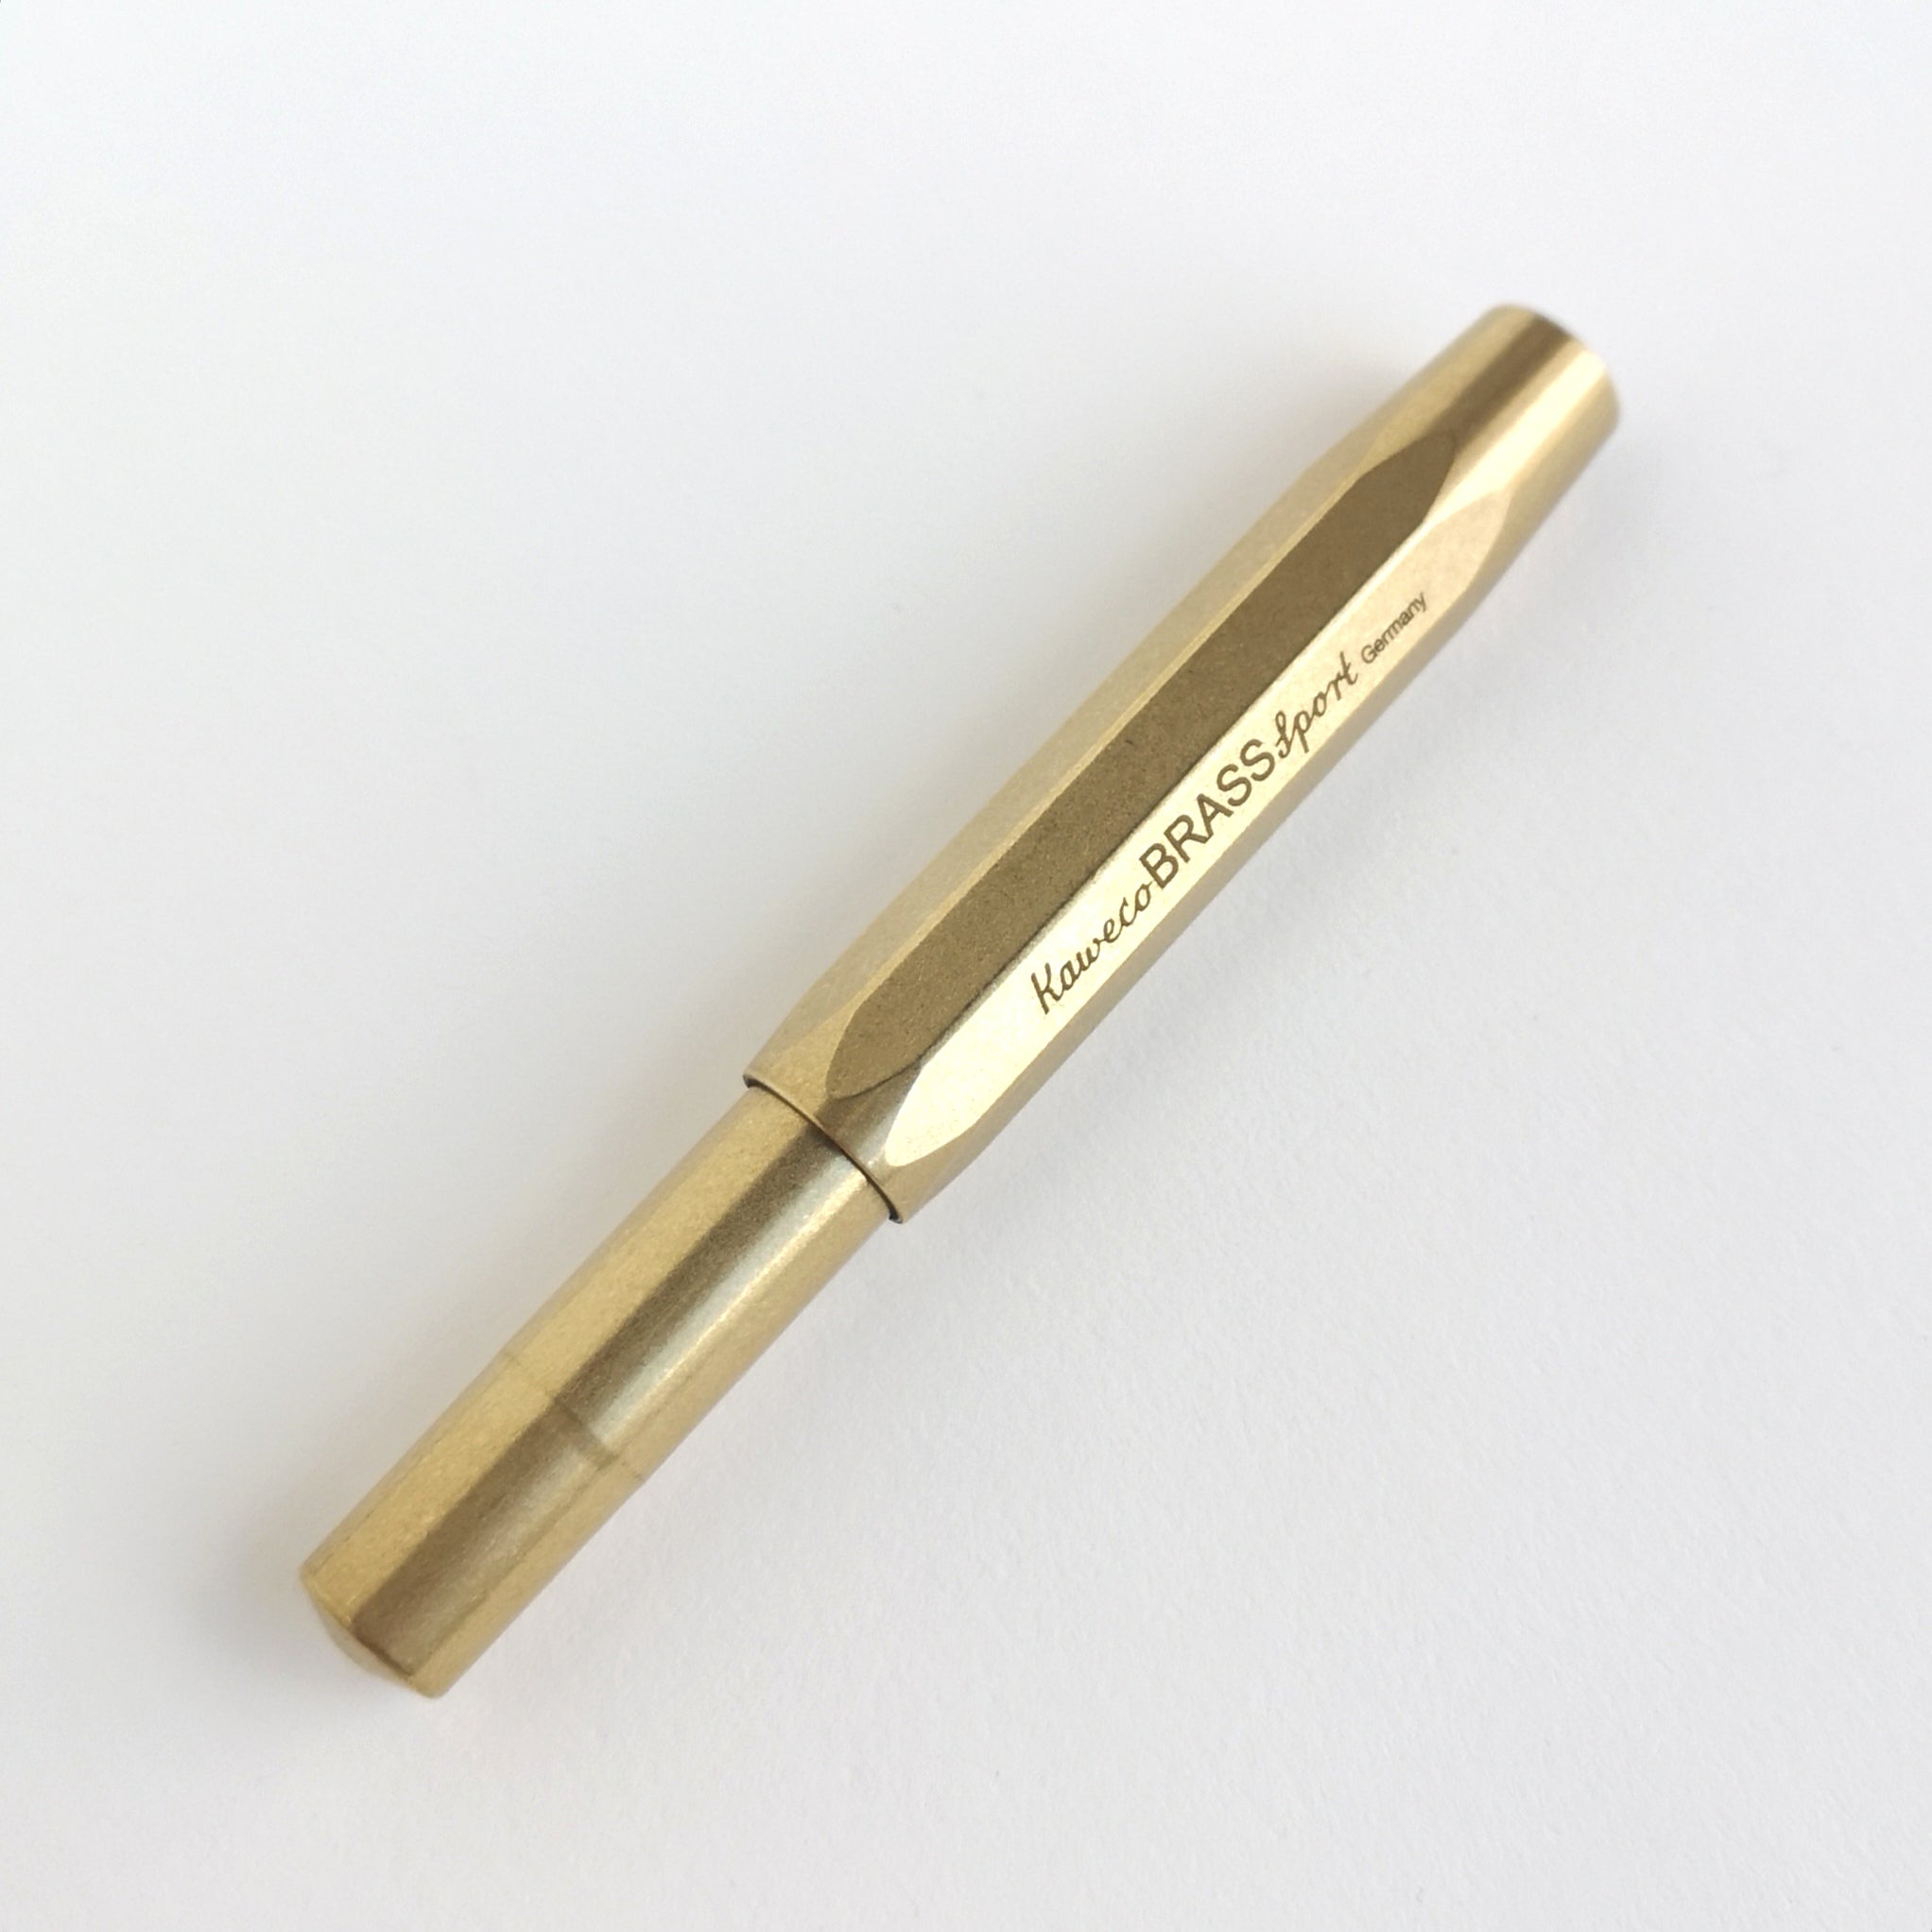 Brass Kaweco Sport Fountain pen with cap on